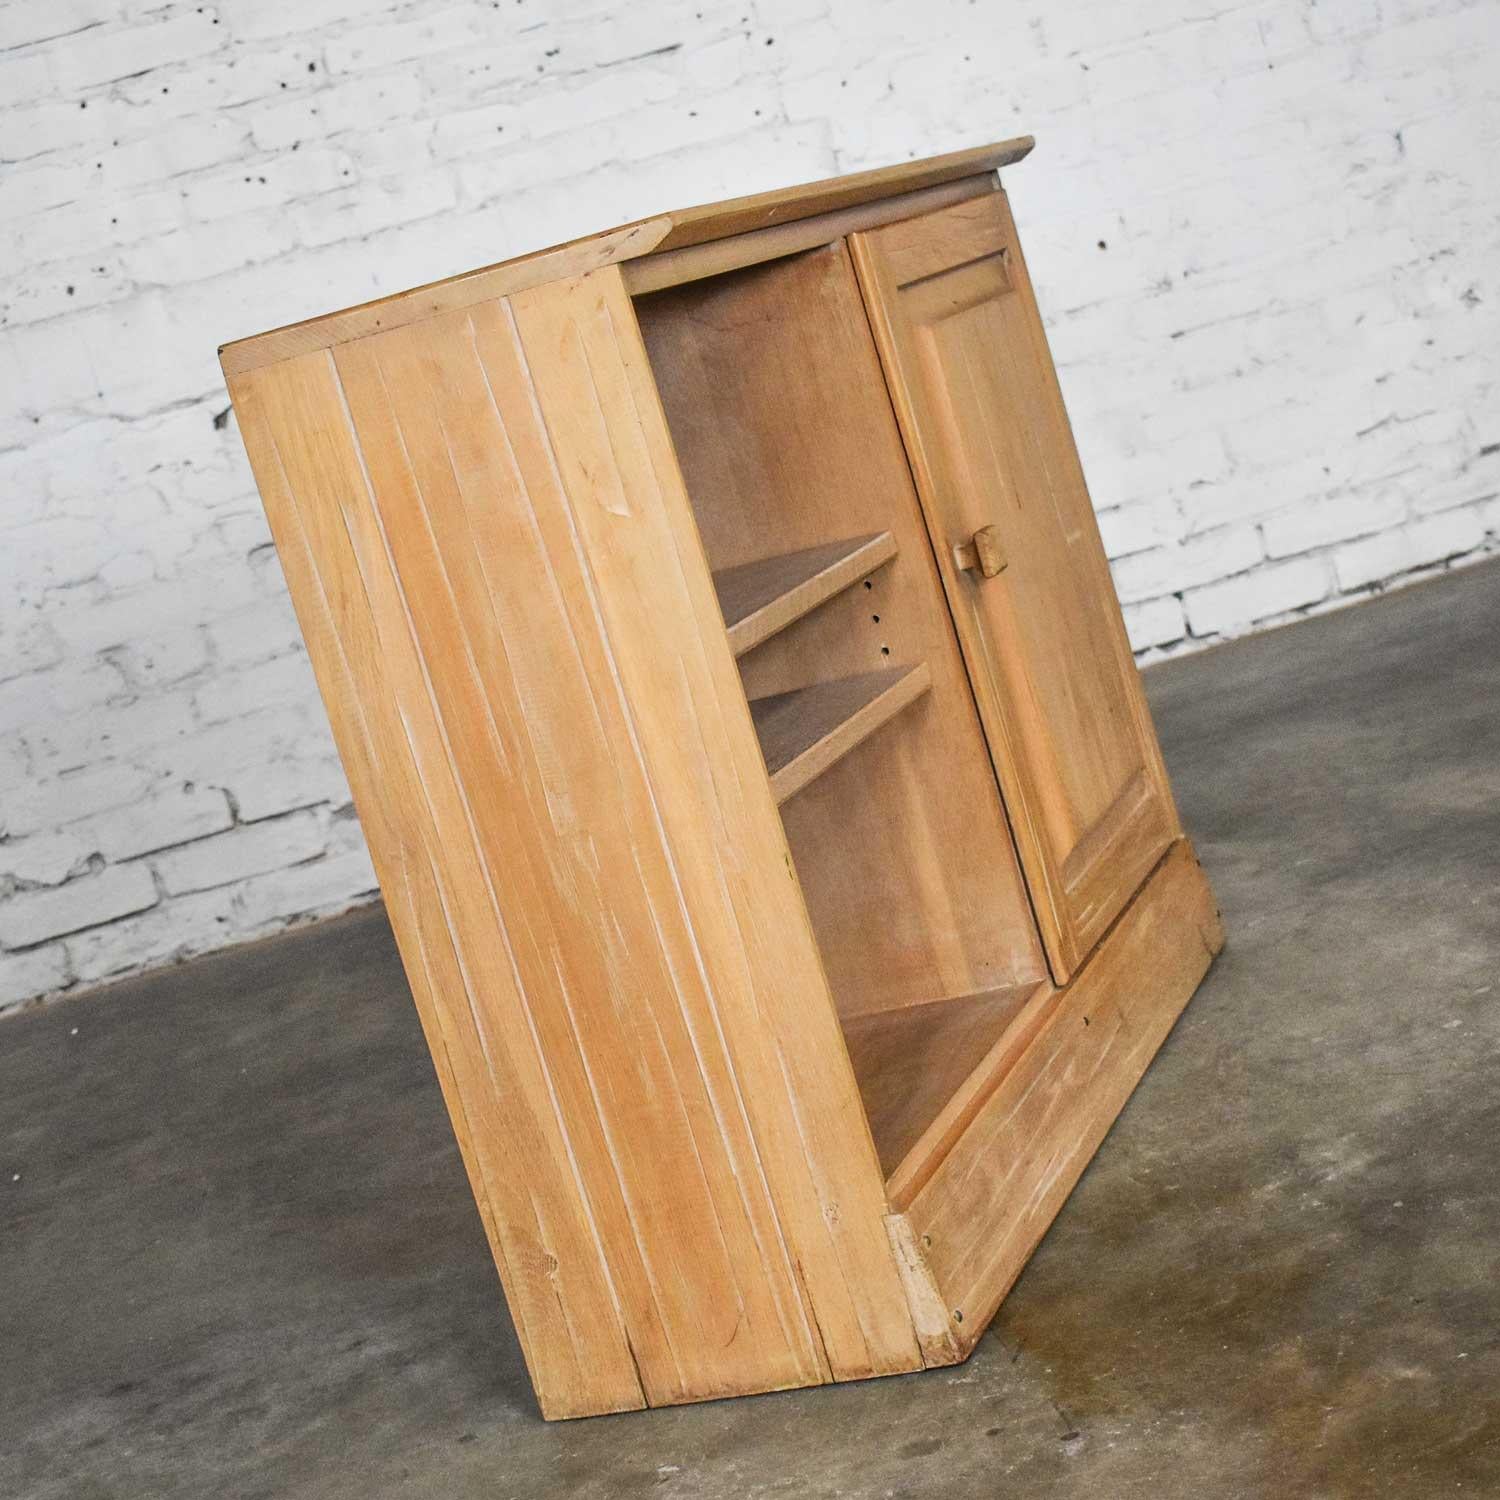 20th Century Ranch Oak End Table Cabinet or Nightstand with Natural Oak Finish by A. Brandt